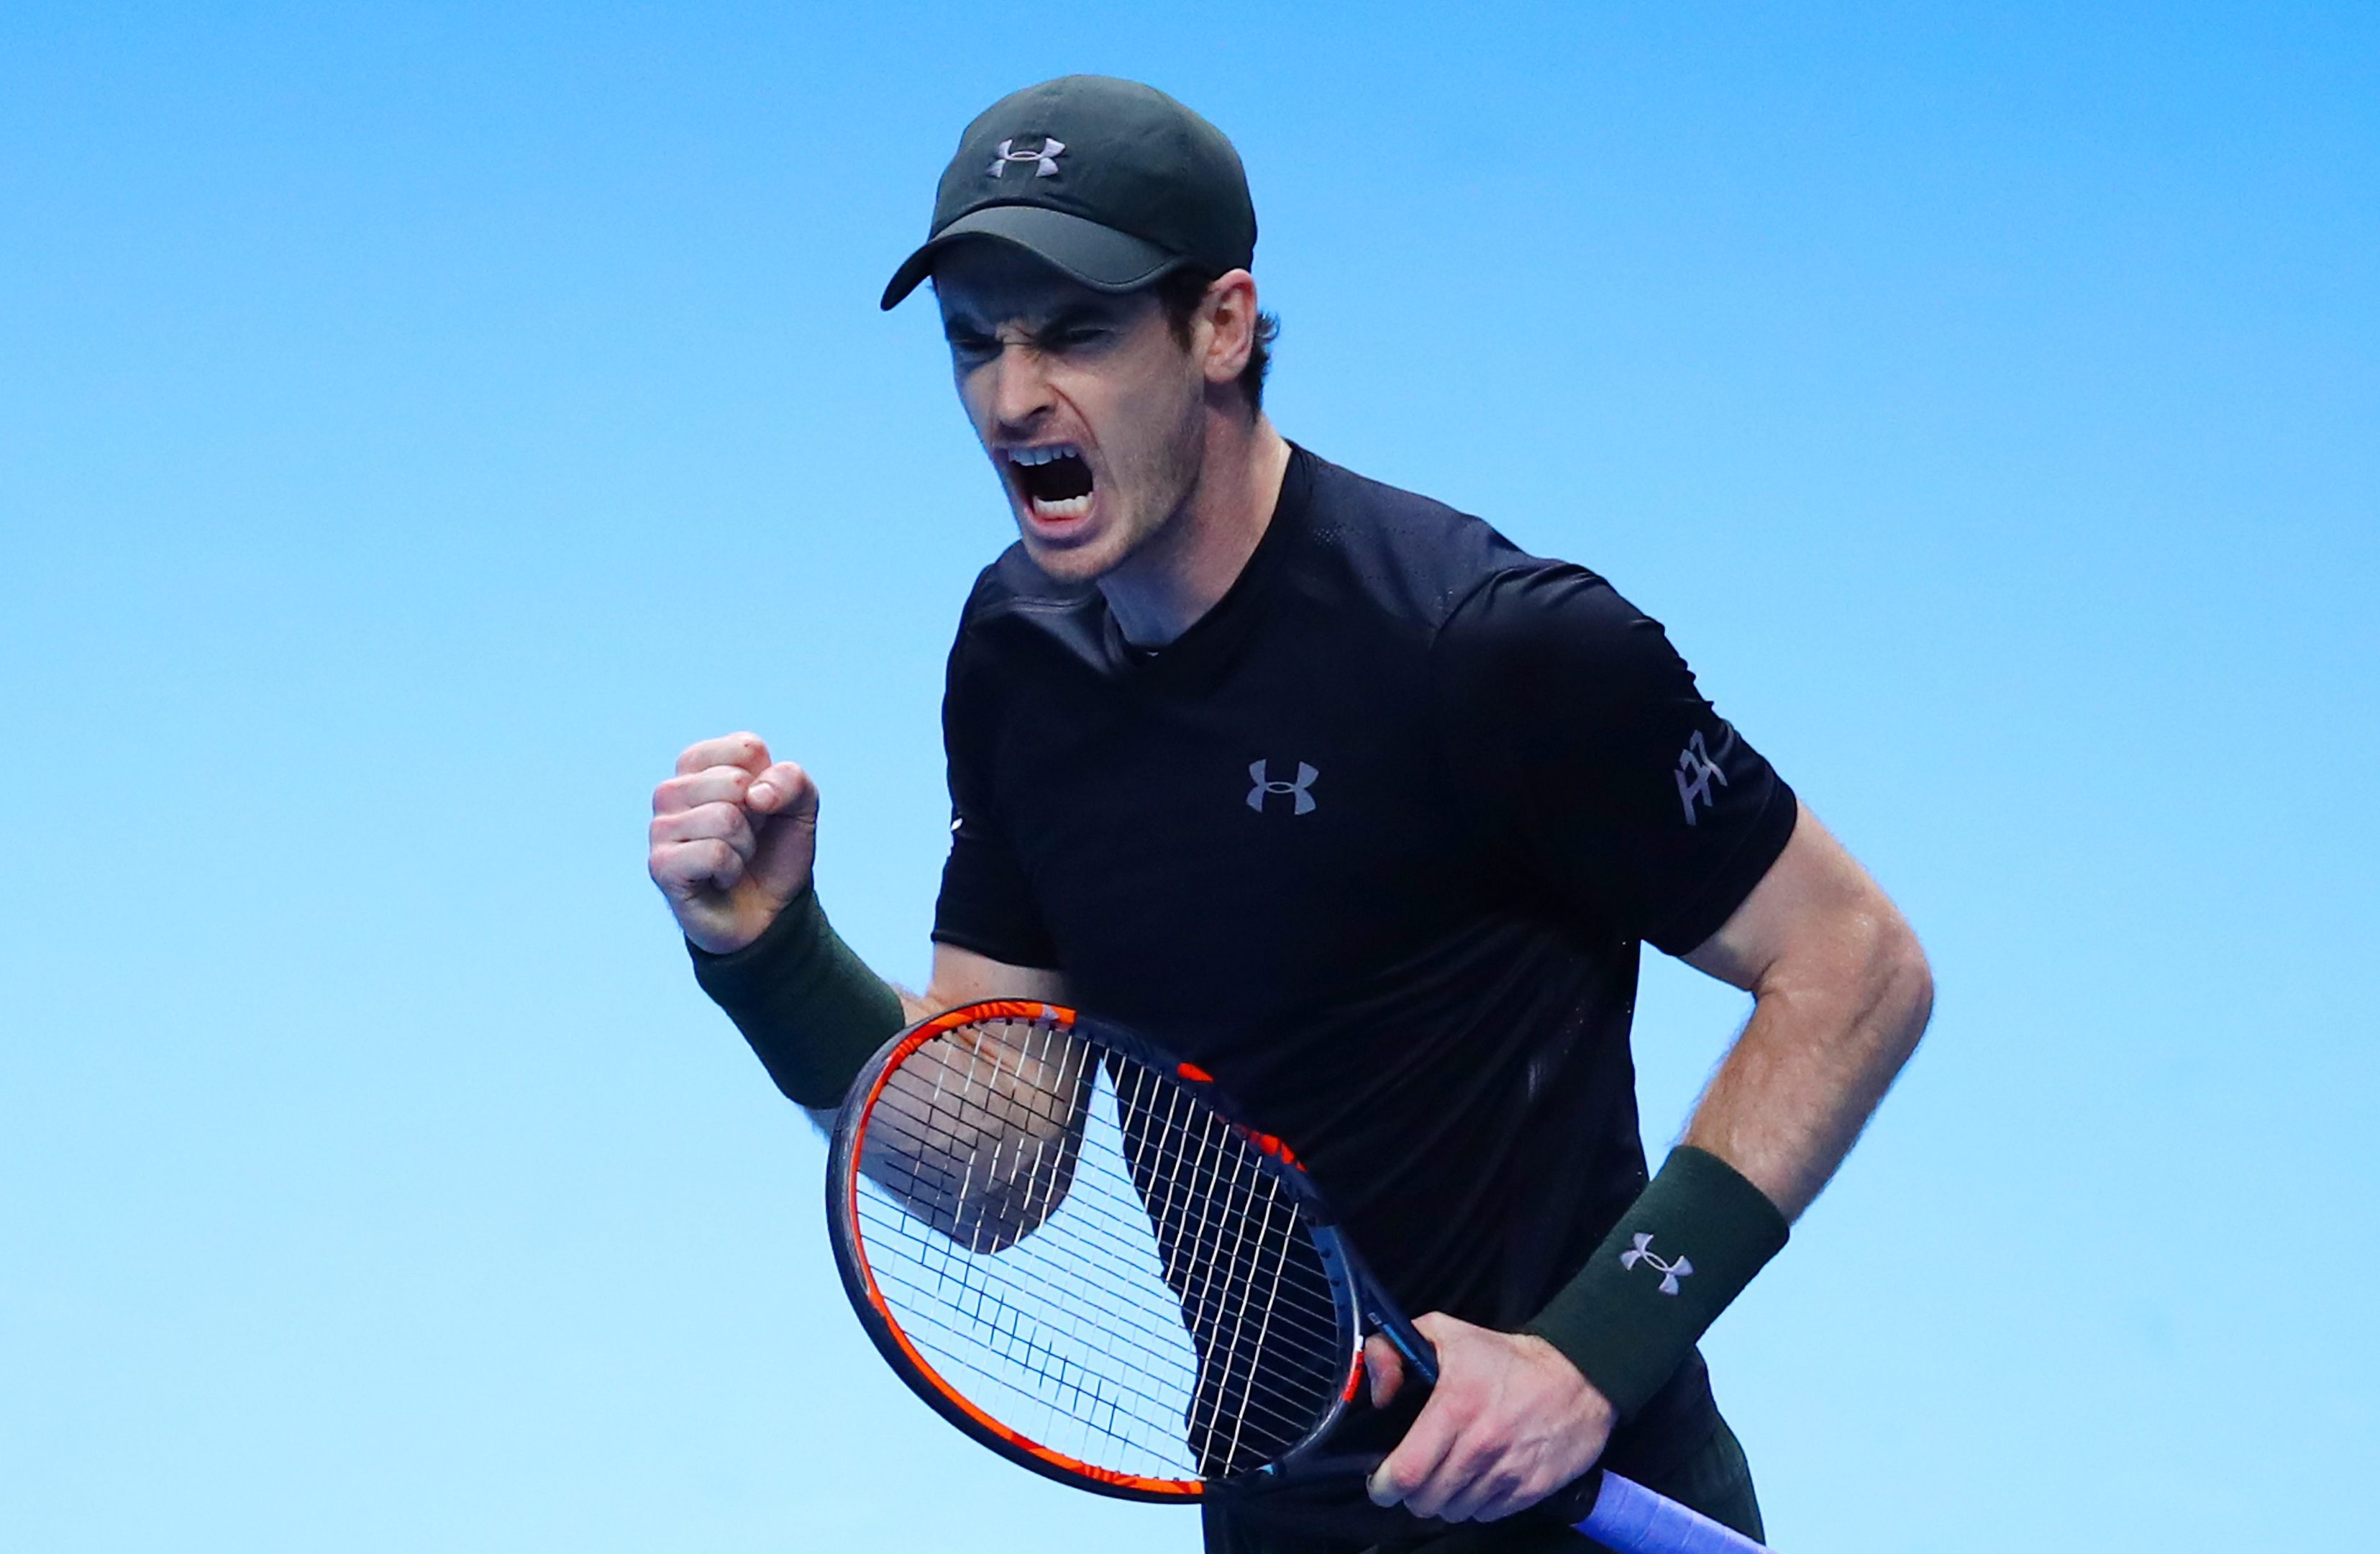 Andy Murray celebrates a point during the Singles Final against Novak Djokovic of Serbia at the O2 Arena on November 20, 2016 in London, England.